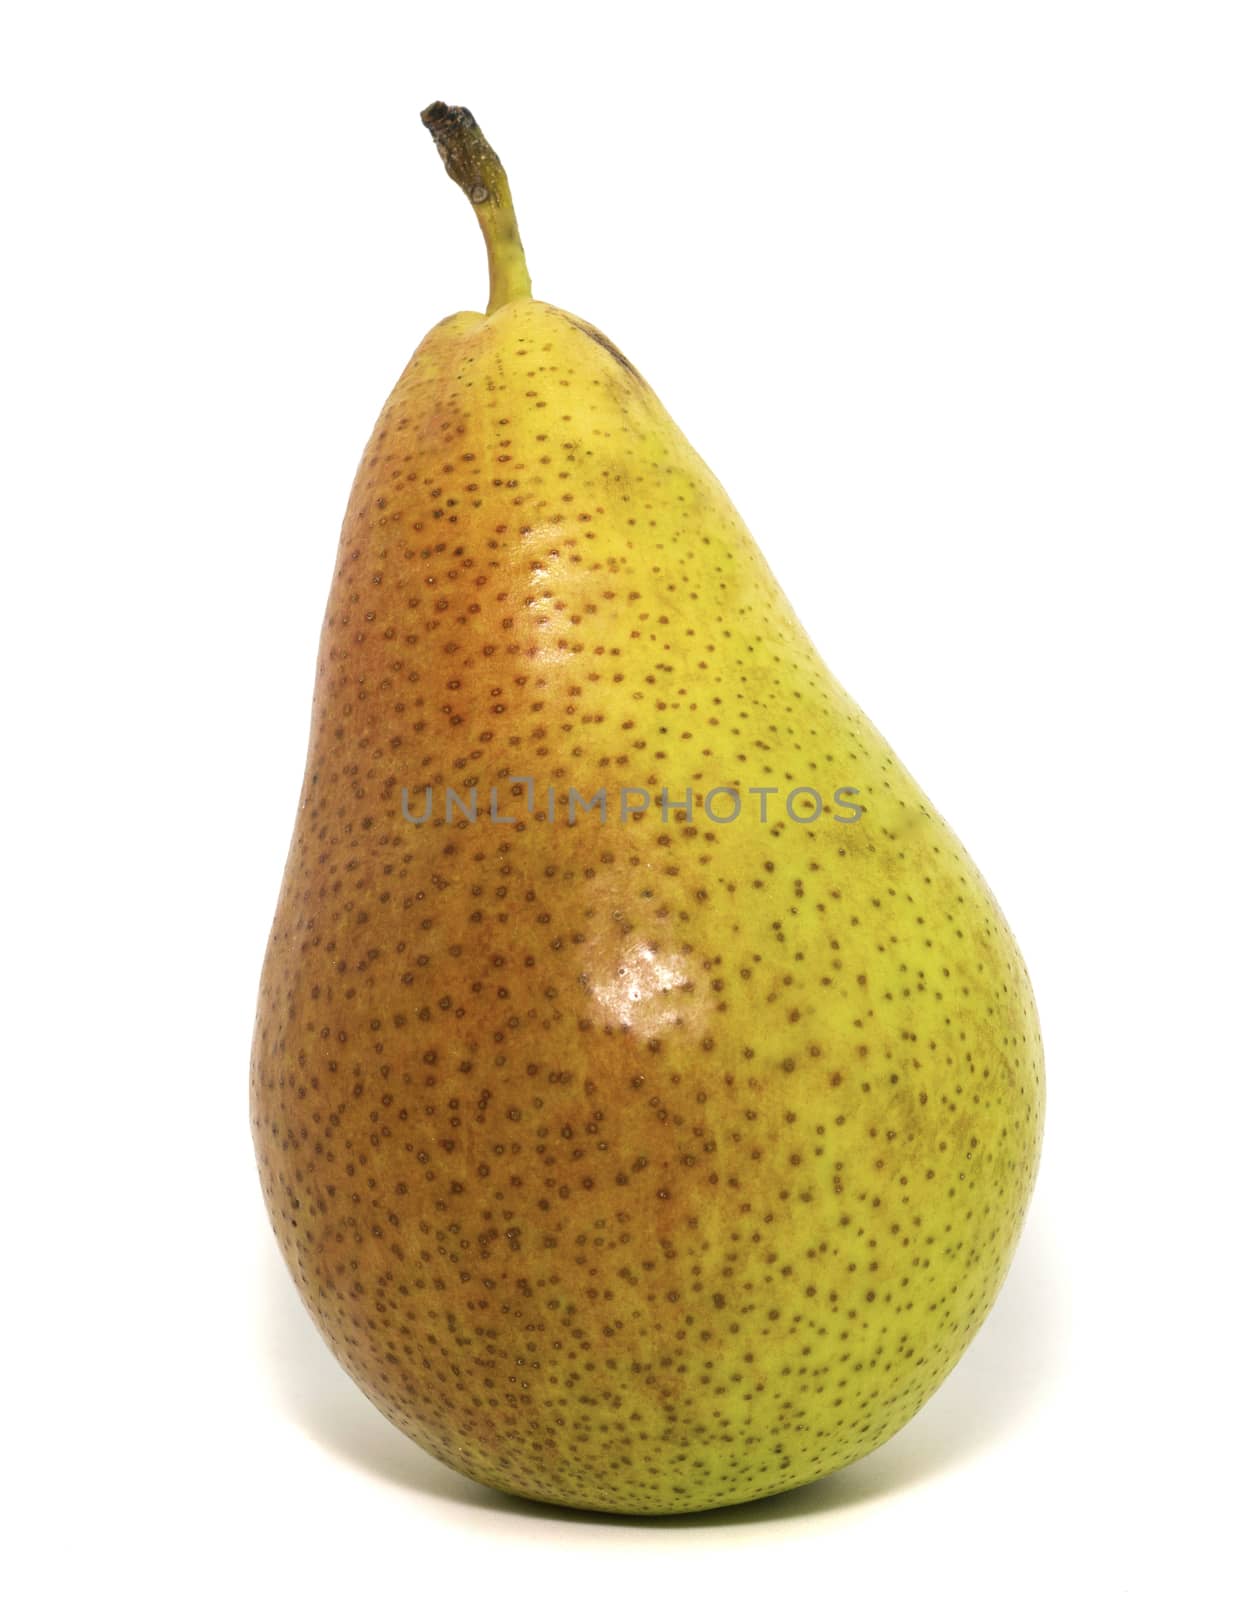 Red-yellow Pear on white Background by gstalker